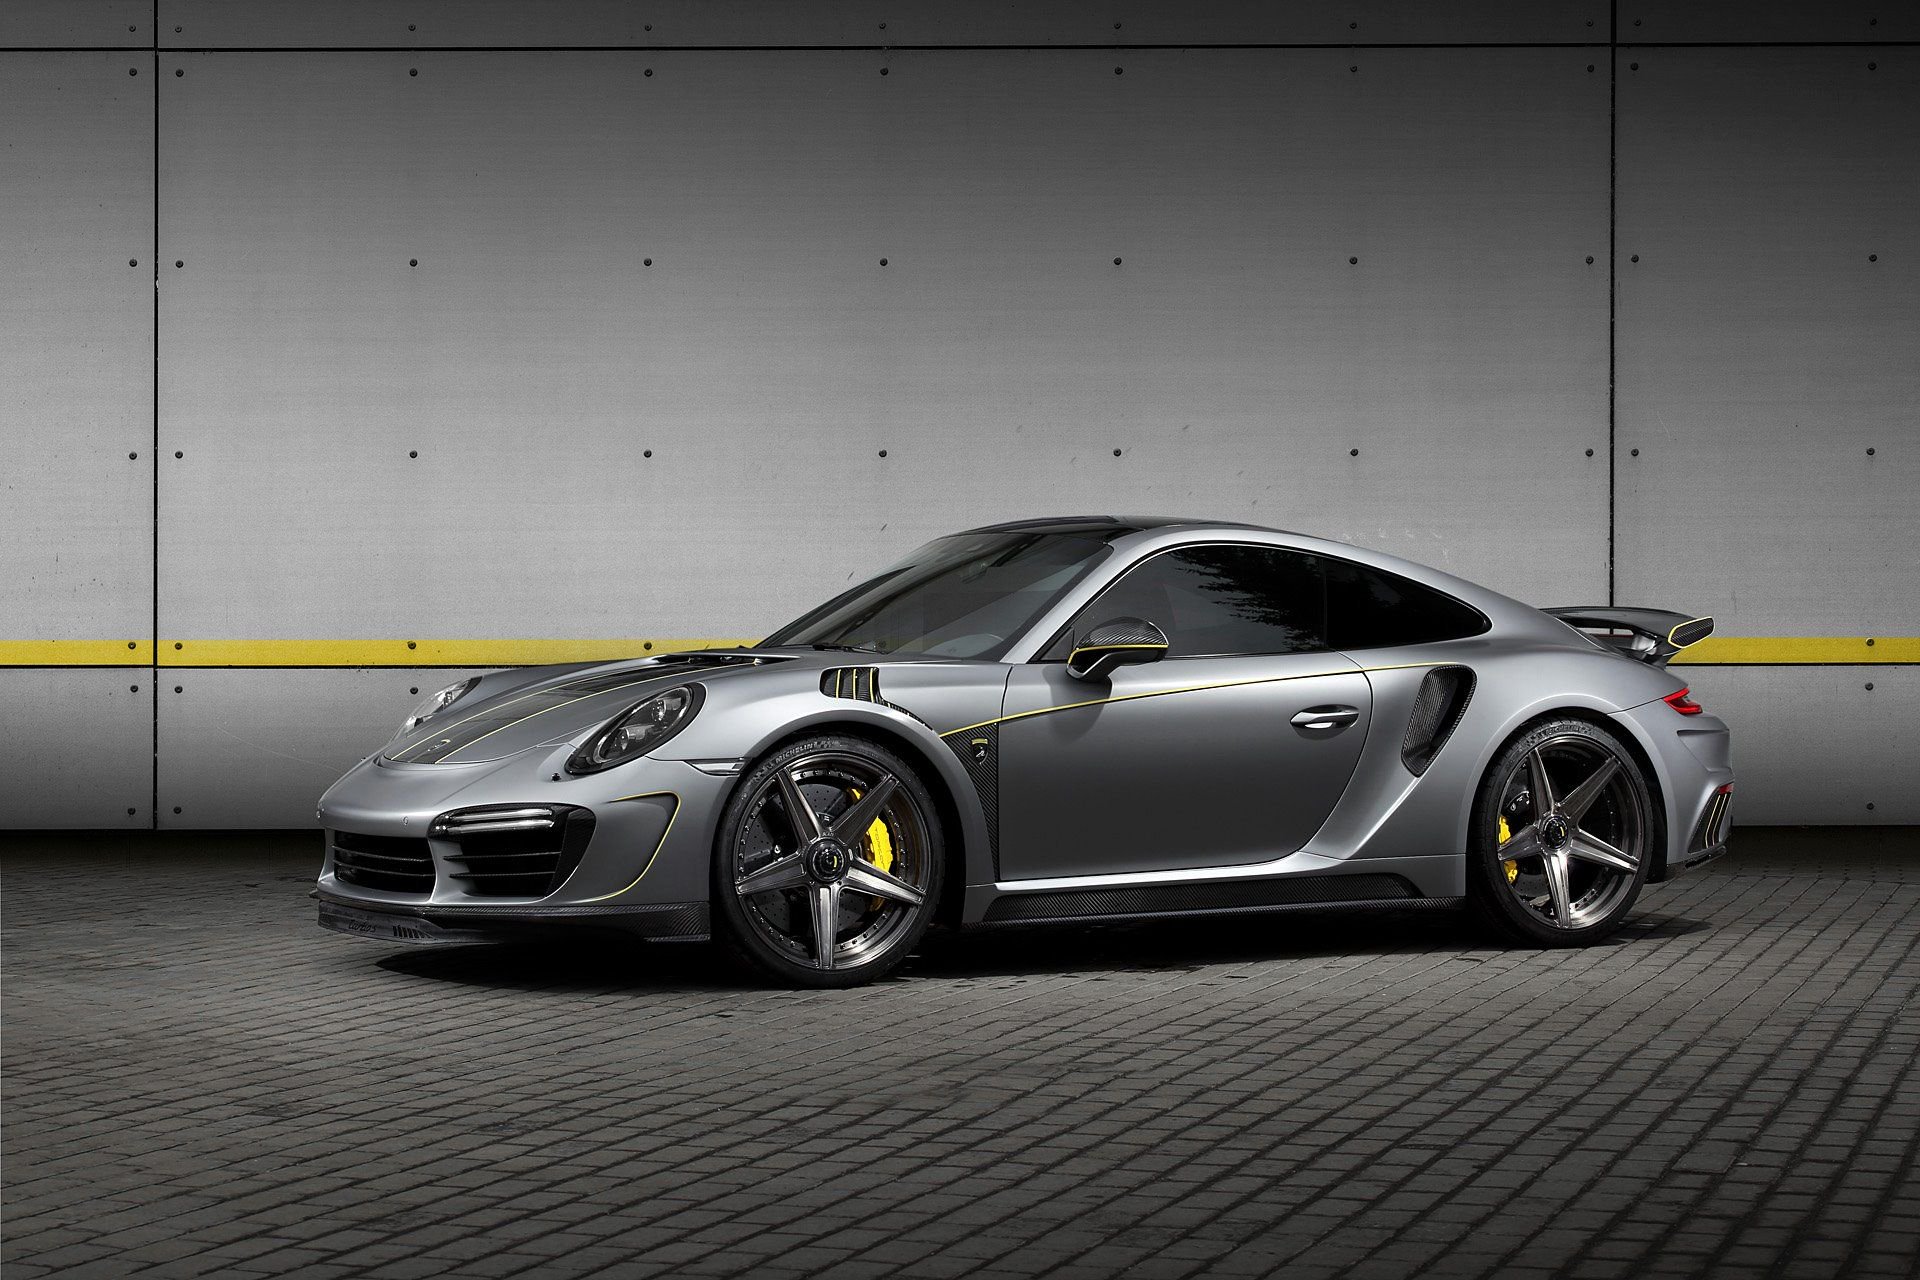 Topcar Gives The Porsche 911 Turbo S Even More Sting